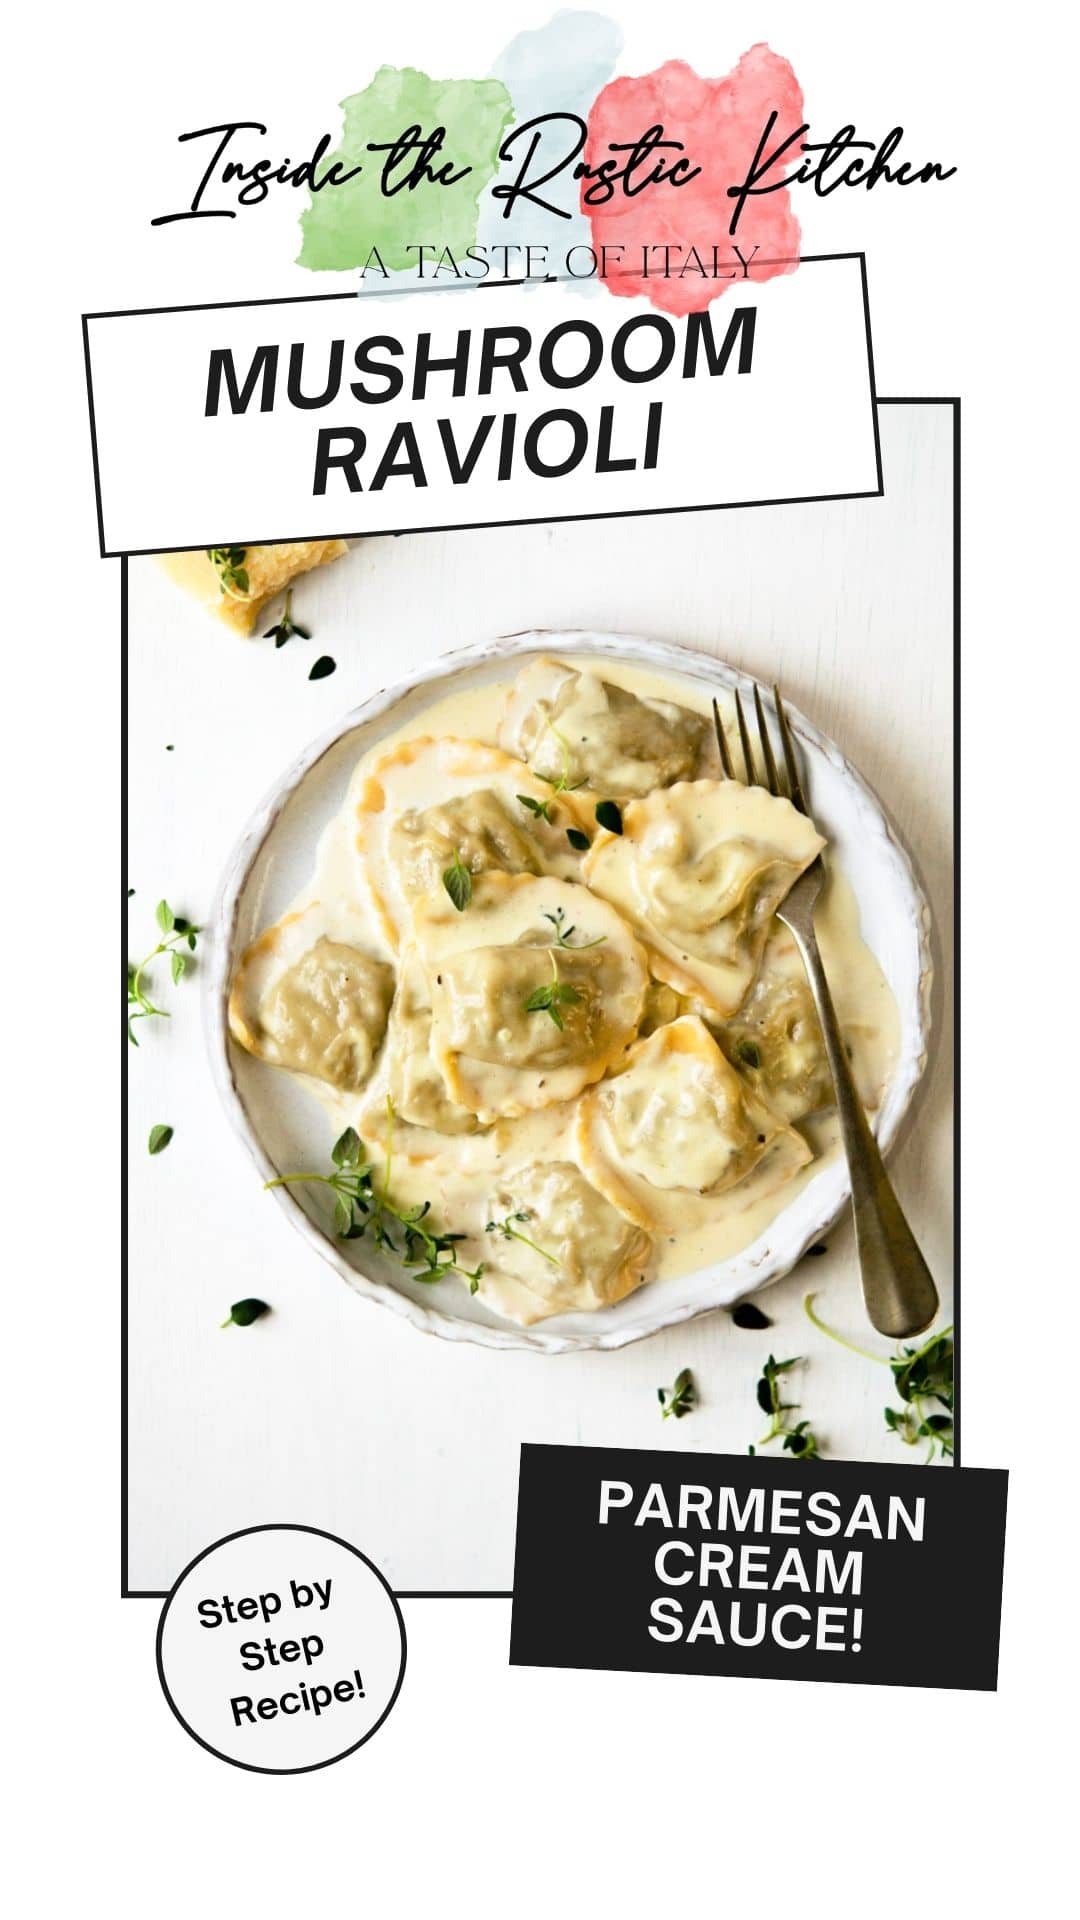 A graphic for mushroom ravioli by Inside the rustic kitchen